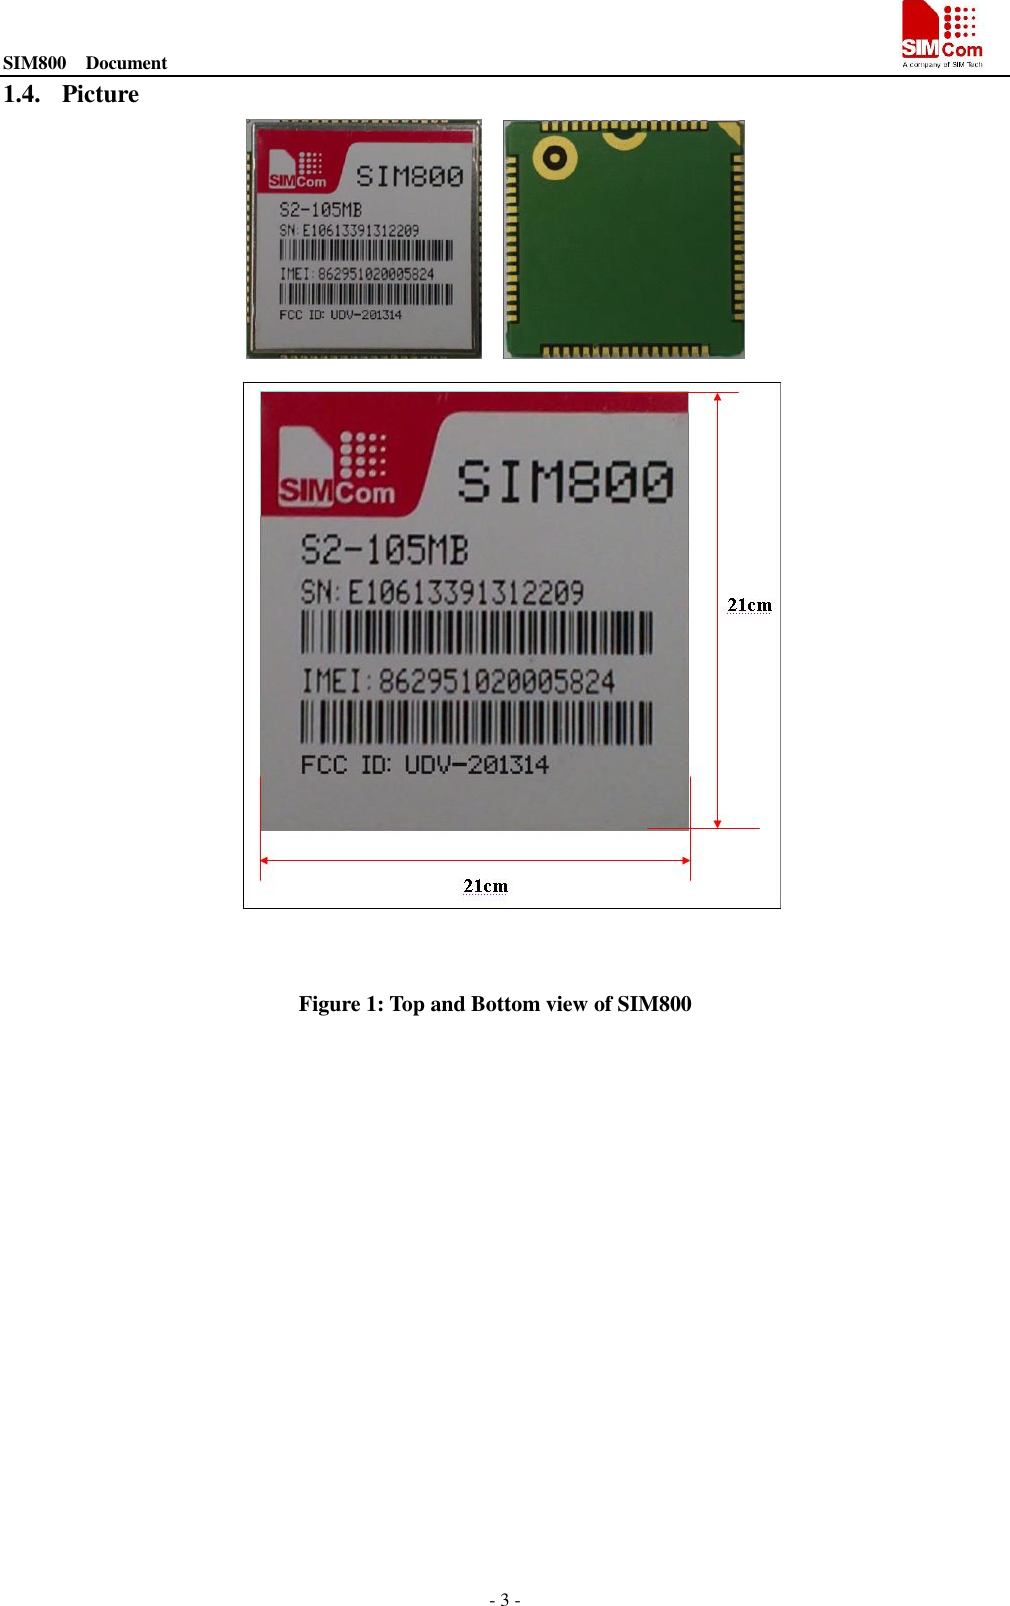 SIM800  Document                                                                                                                                                          - 3 - 1.4. Picture        Figure 1: Top and Bottom view of SIM800                 